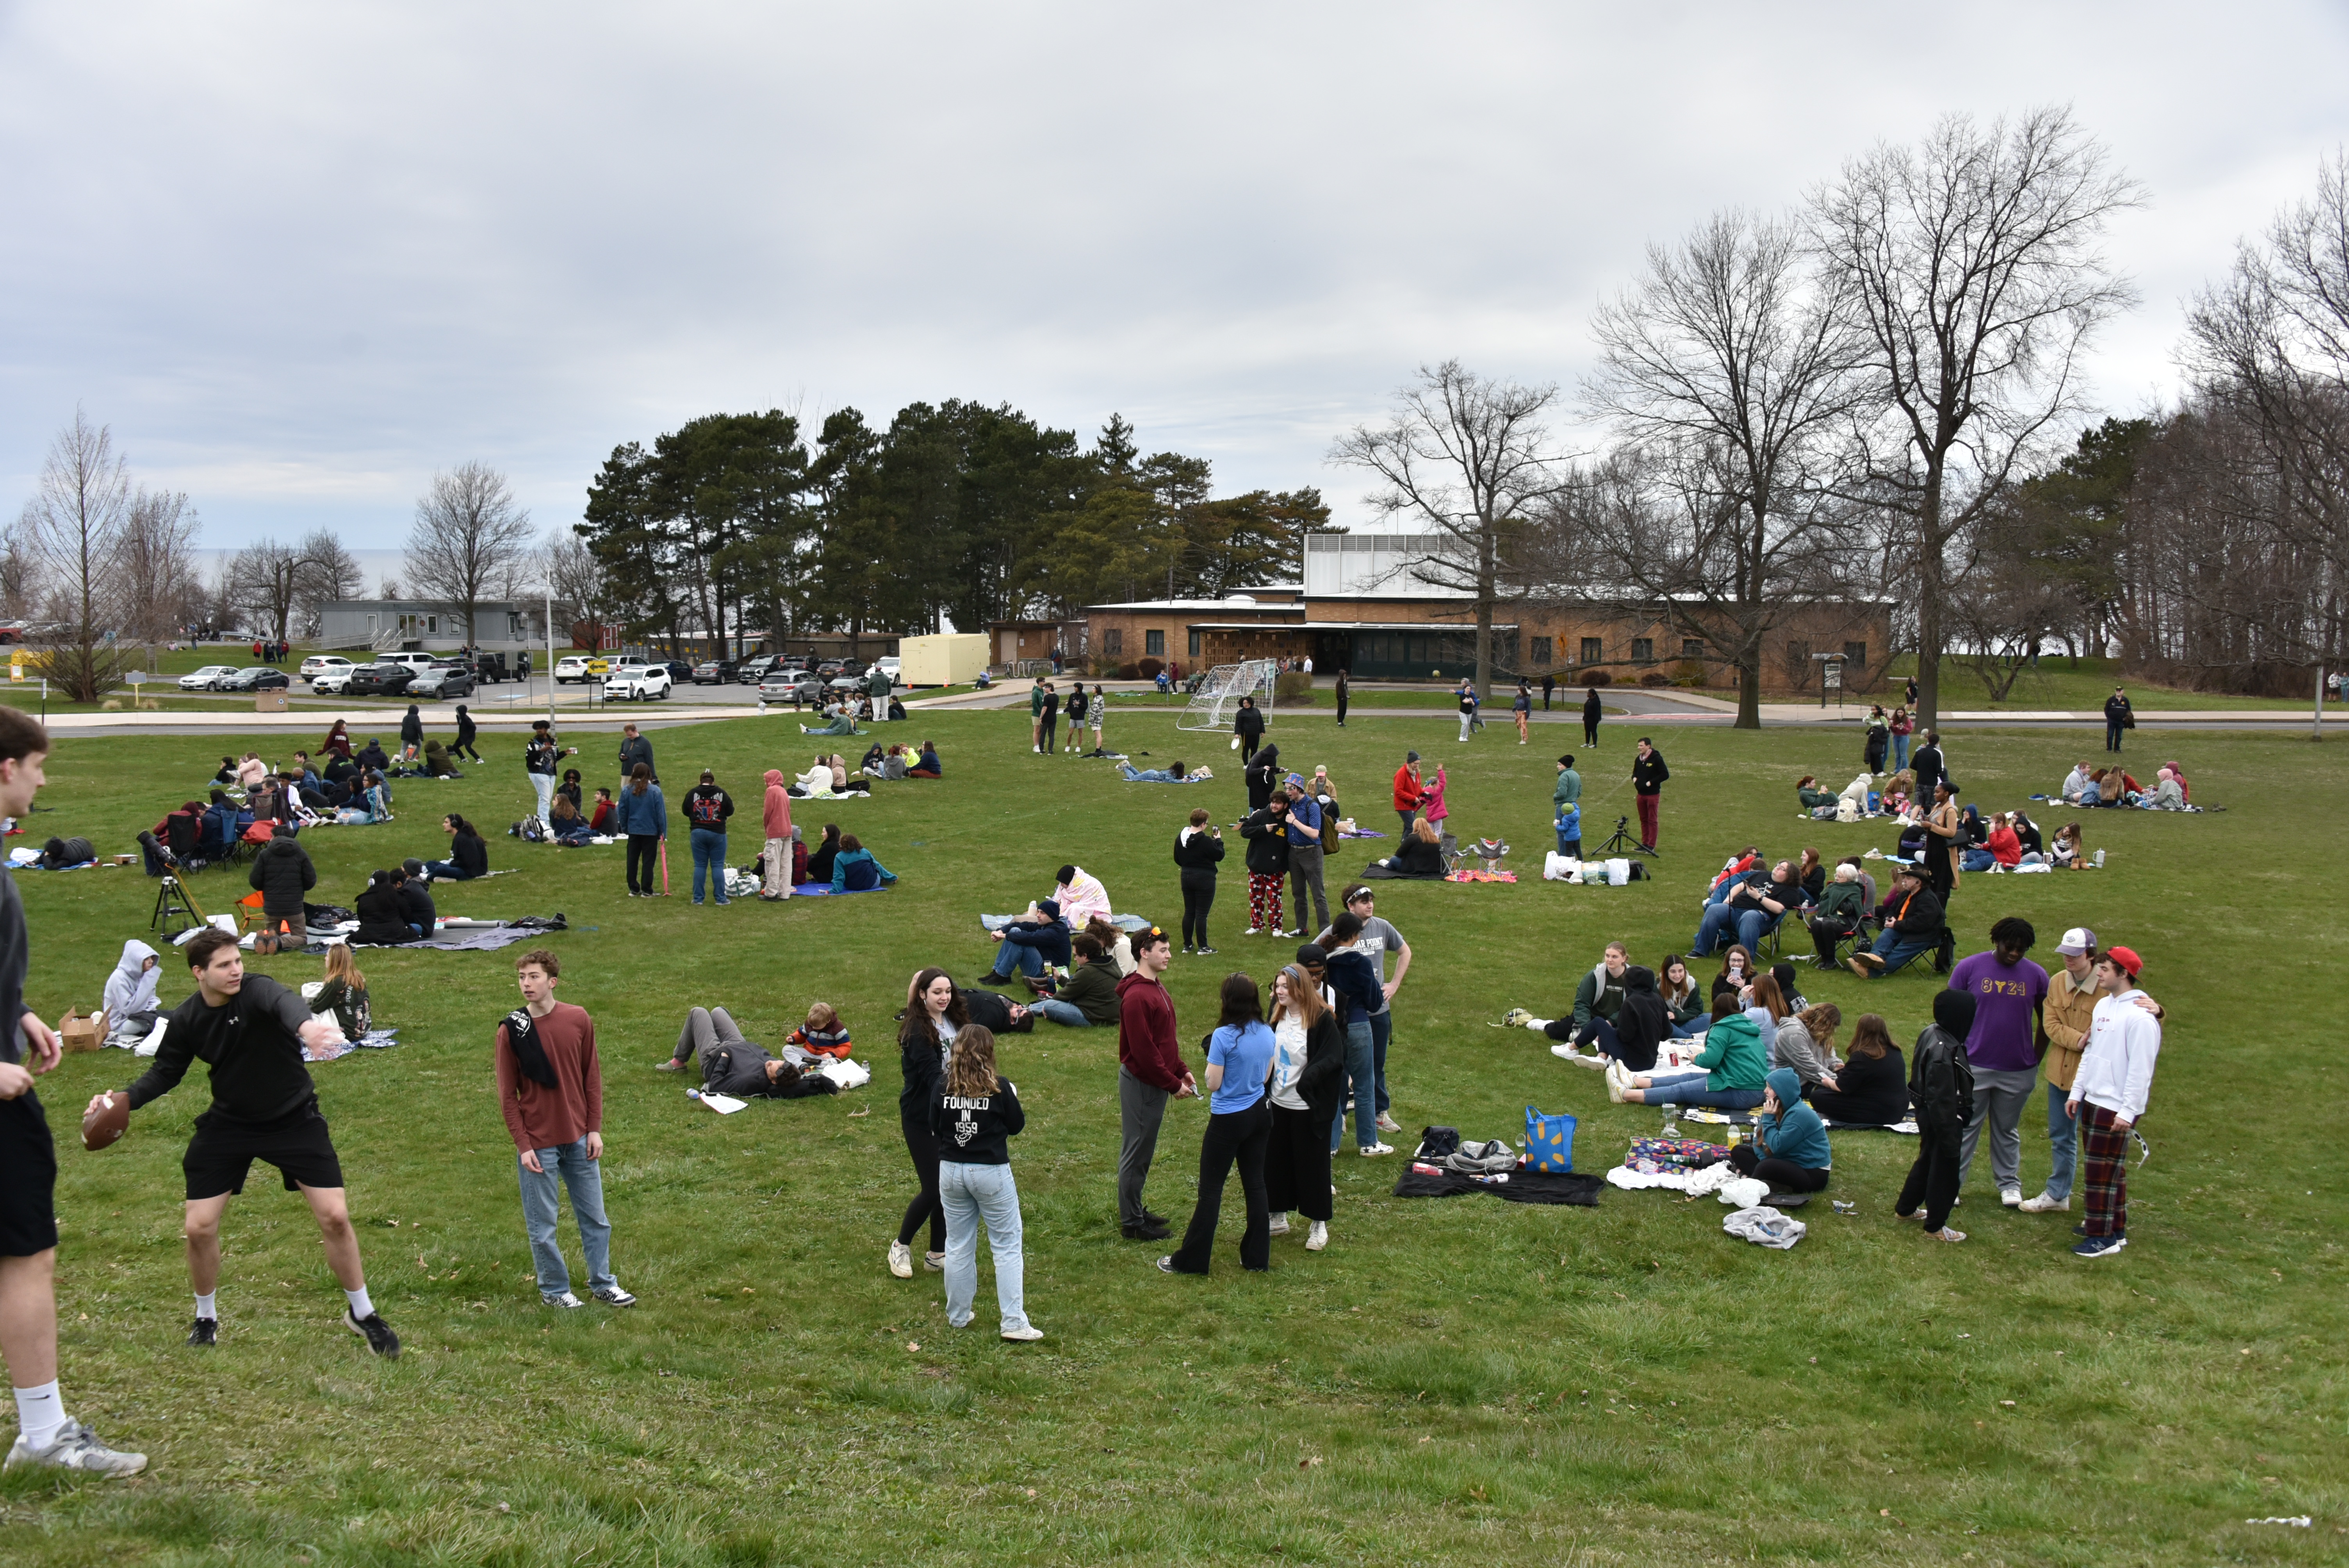 Before the eclipse rolled in, the Division of Student Affairs hosted a viewing party on Swetman Field featuring recreation and craft opportunities as well as eclipse-themed cookies and free T-shirts. A large turnout enjoyed a spring day – although the temperatures dropped significantly while the sun was in full shadow.